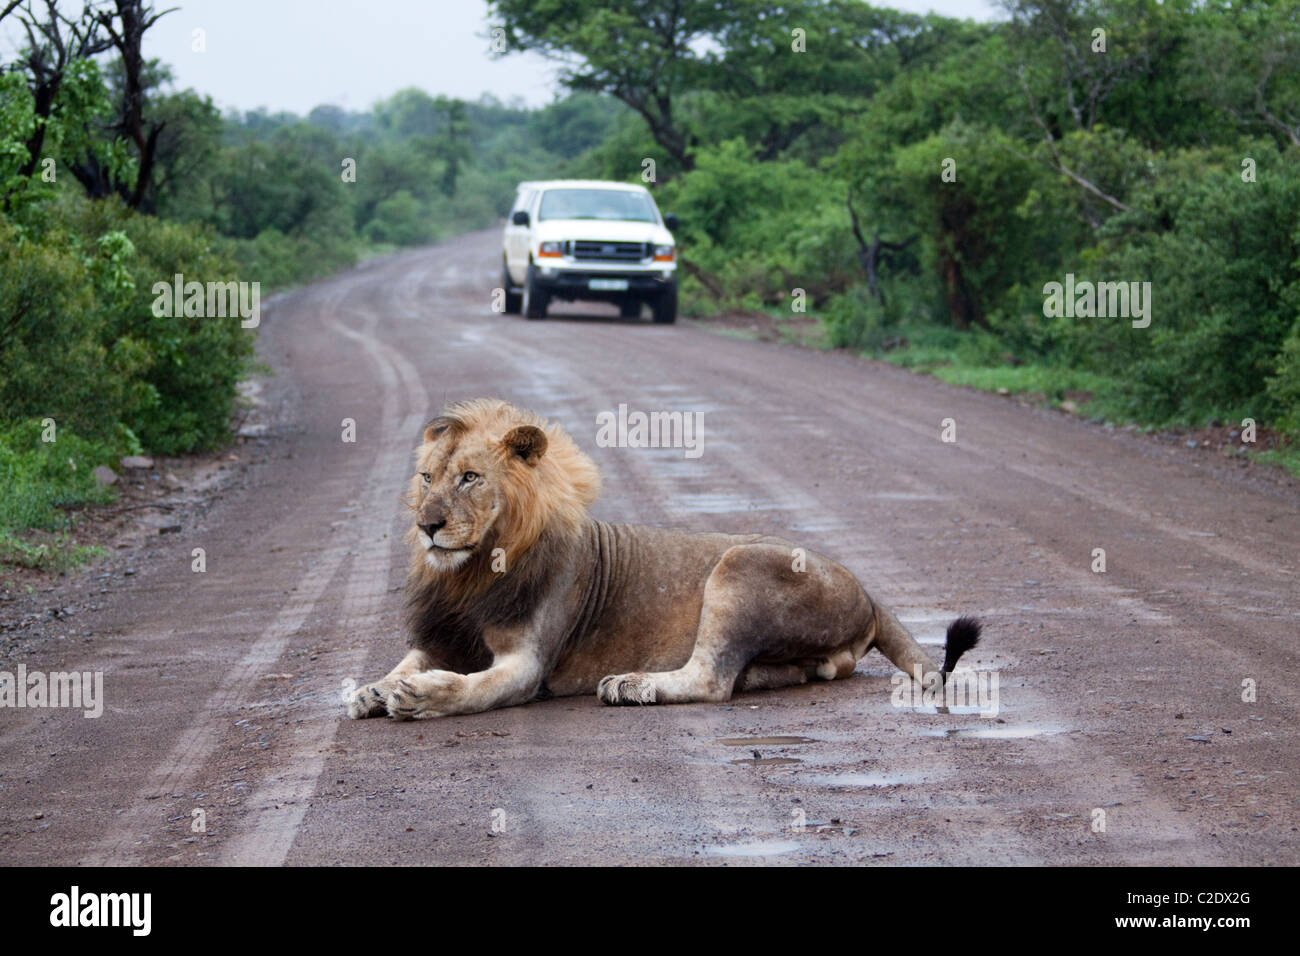 Male Lion (Panthera Leo). Vulnerable species. Lion lying on a tourist road in Imfolozi. Stock Photo